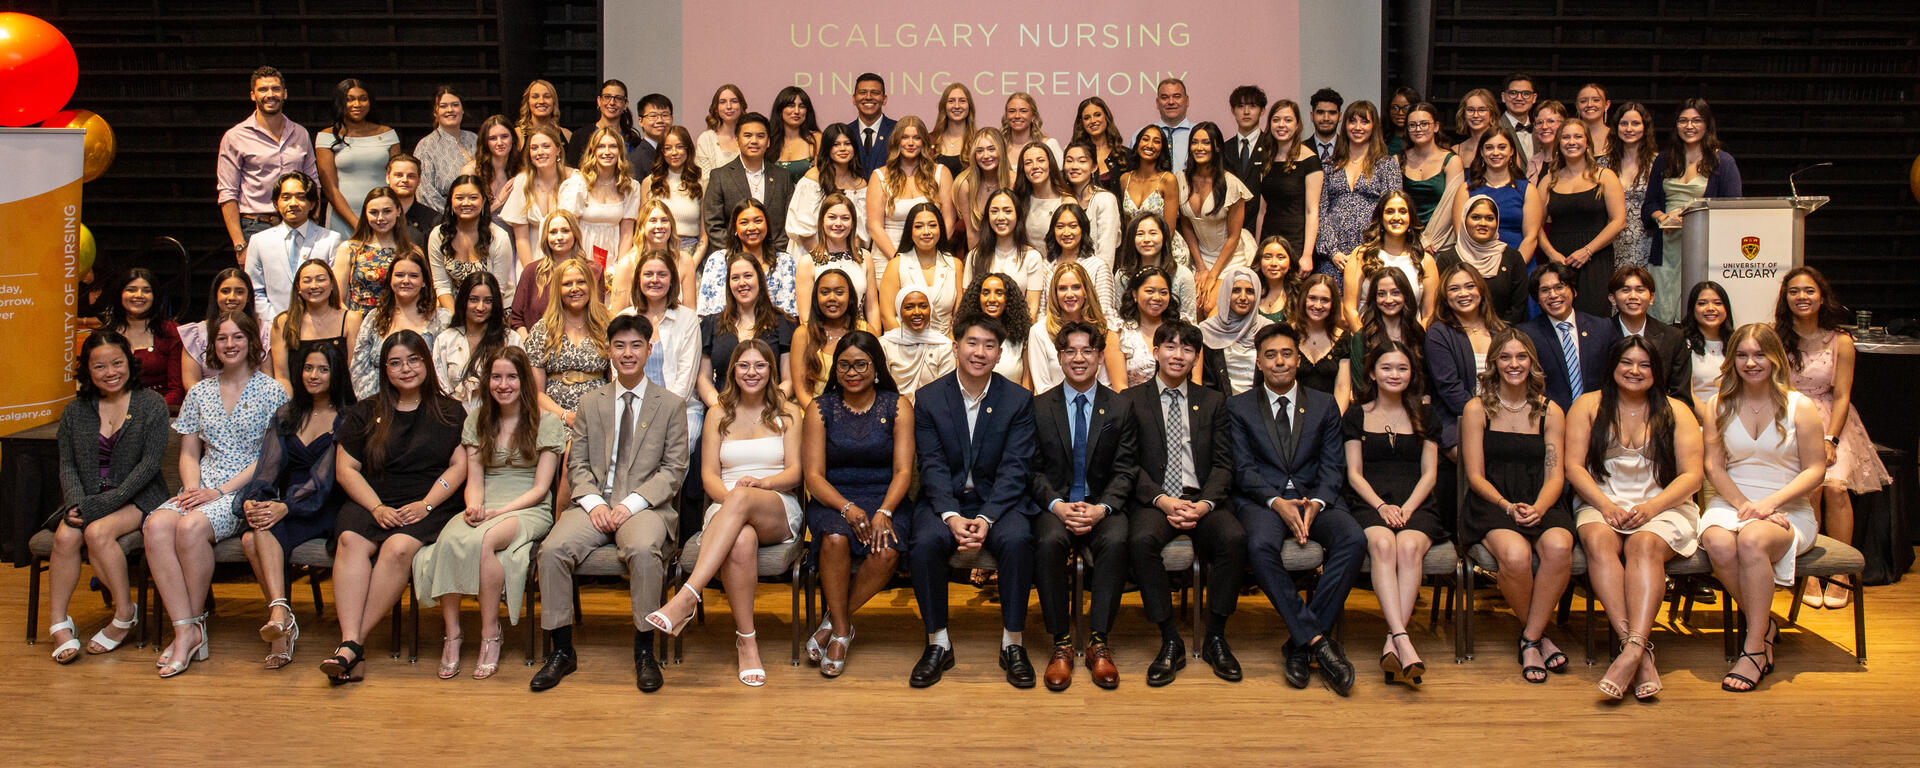 Nursing students at pinning ceremony class photo